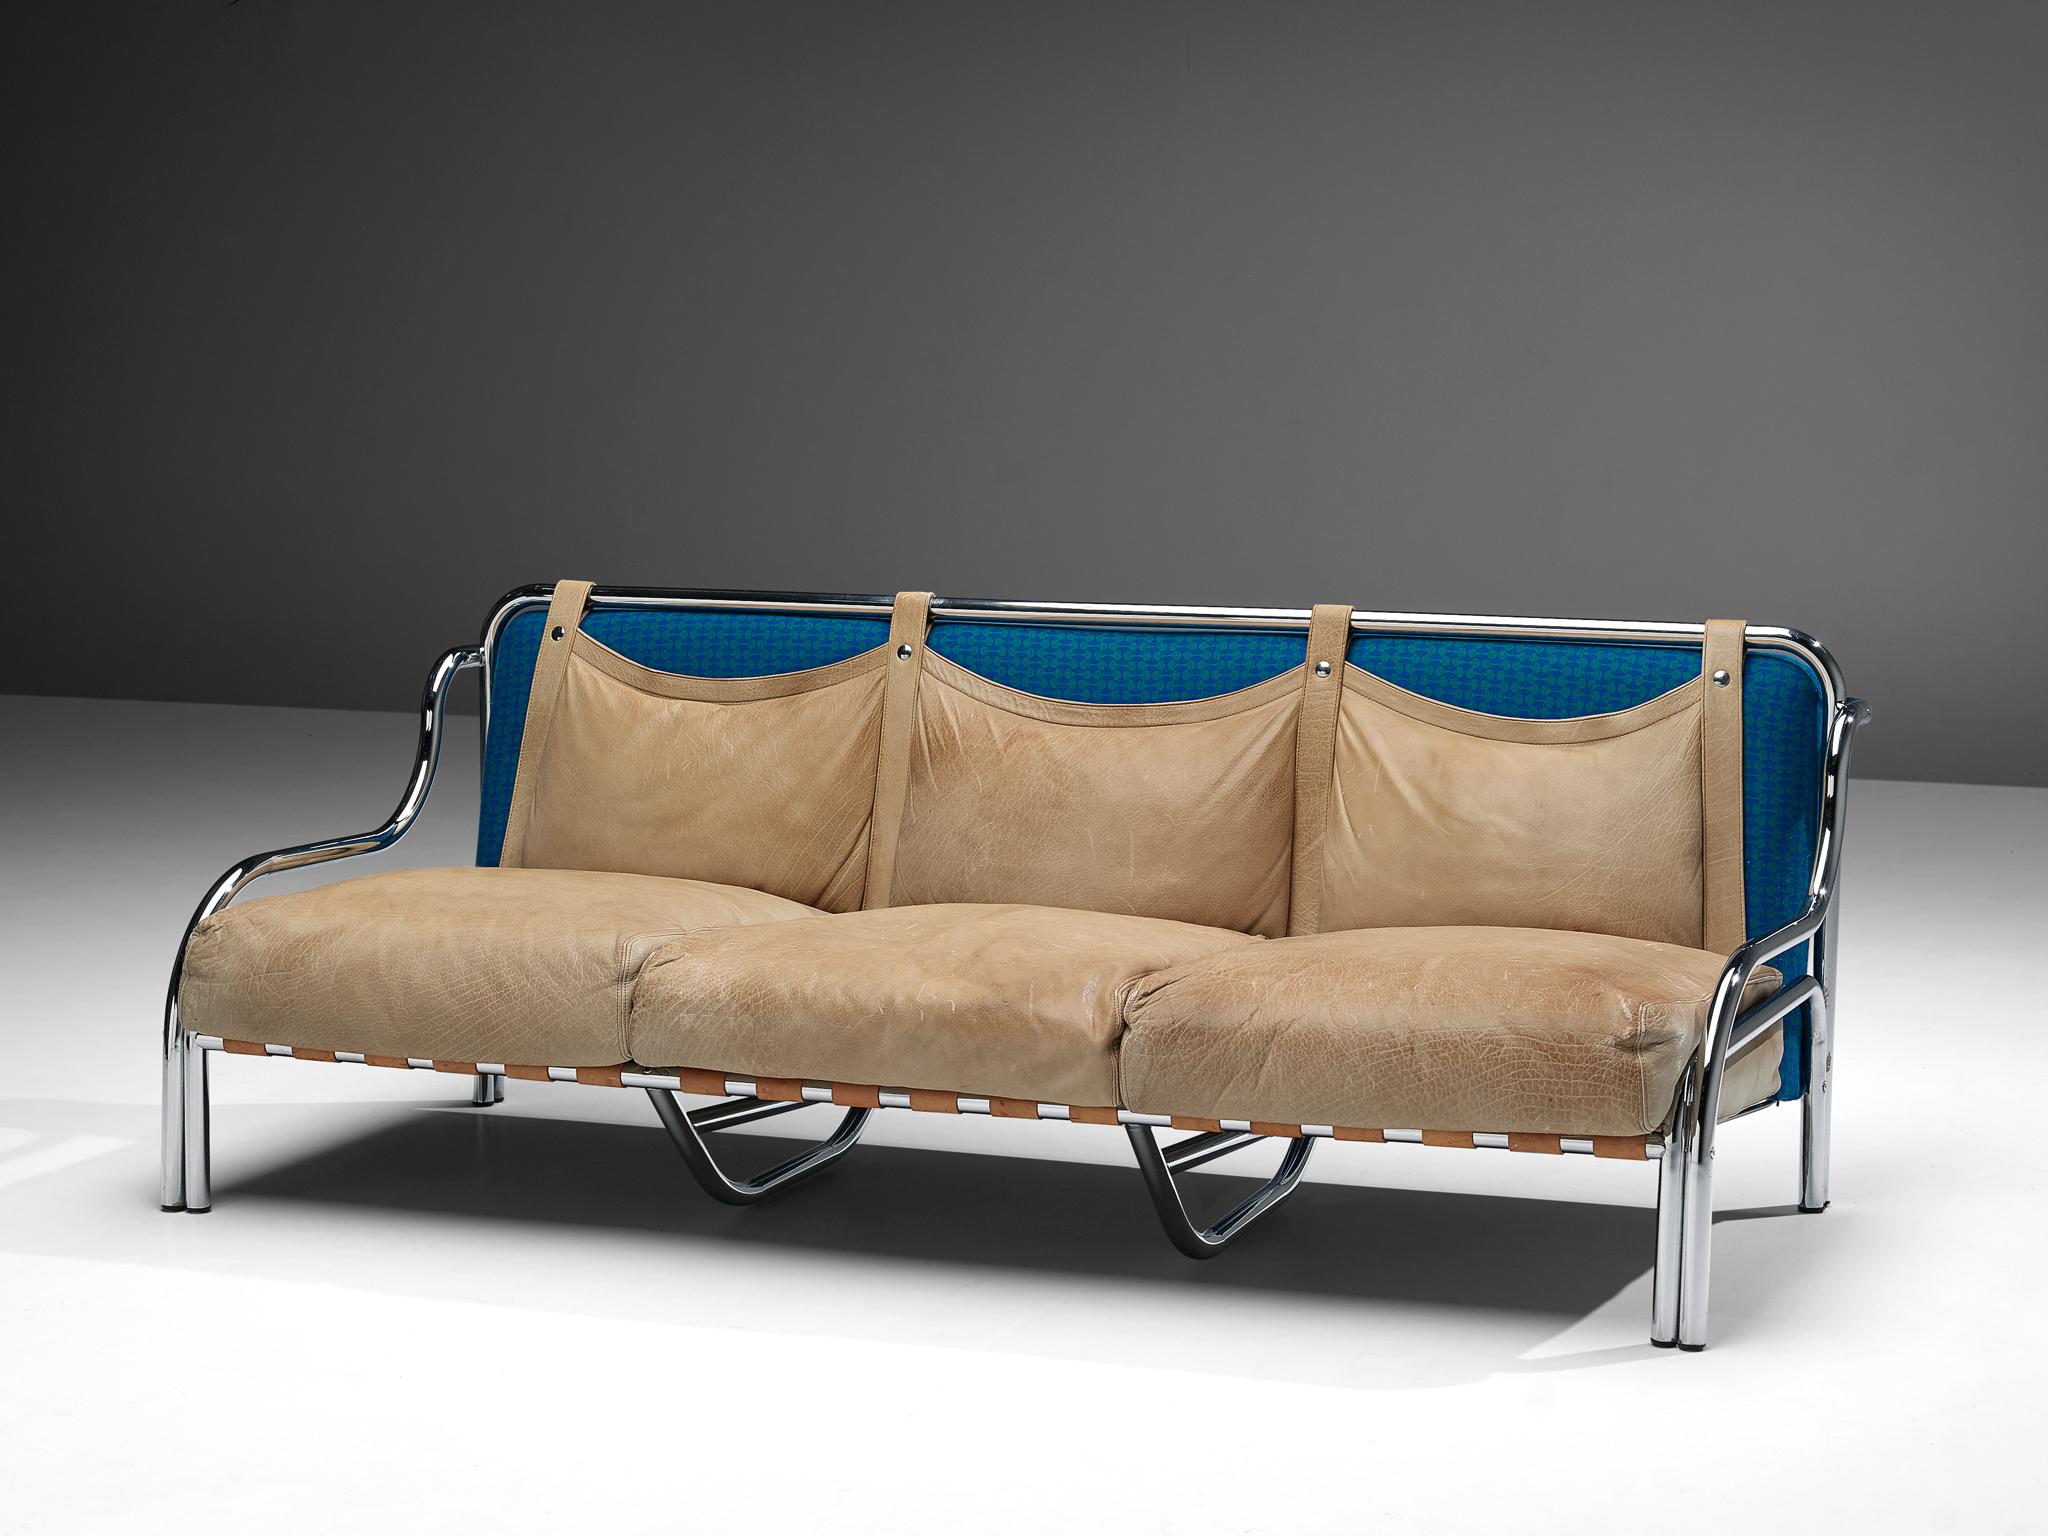 Gae Aulenti for Poltranova, sofa model 'Stringa', leather, chromed metal, blue fabric upholstery, Italy, 1962

'Stringa' sofa designed by Gae Aulenti for Poltranova in 1962. A tubular chrome frame with strong proportions and curves holds the leather